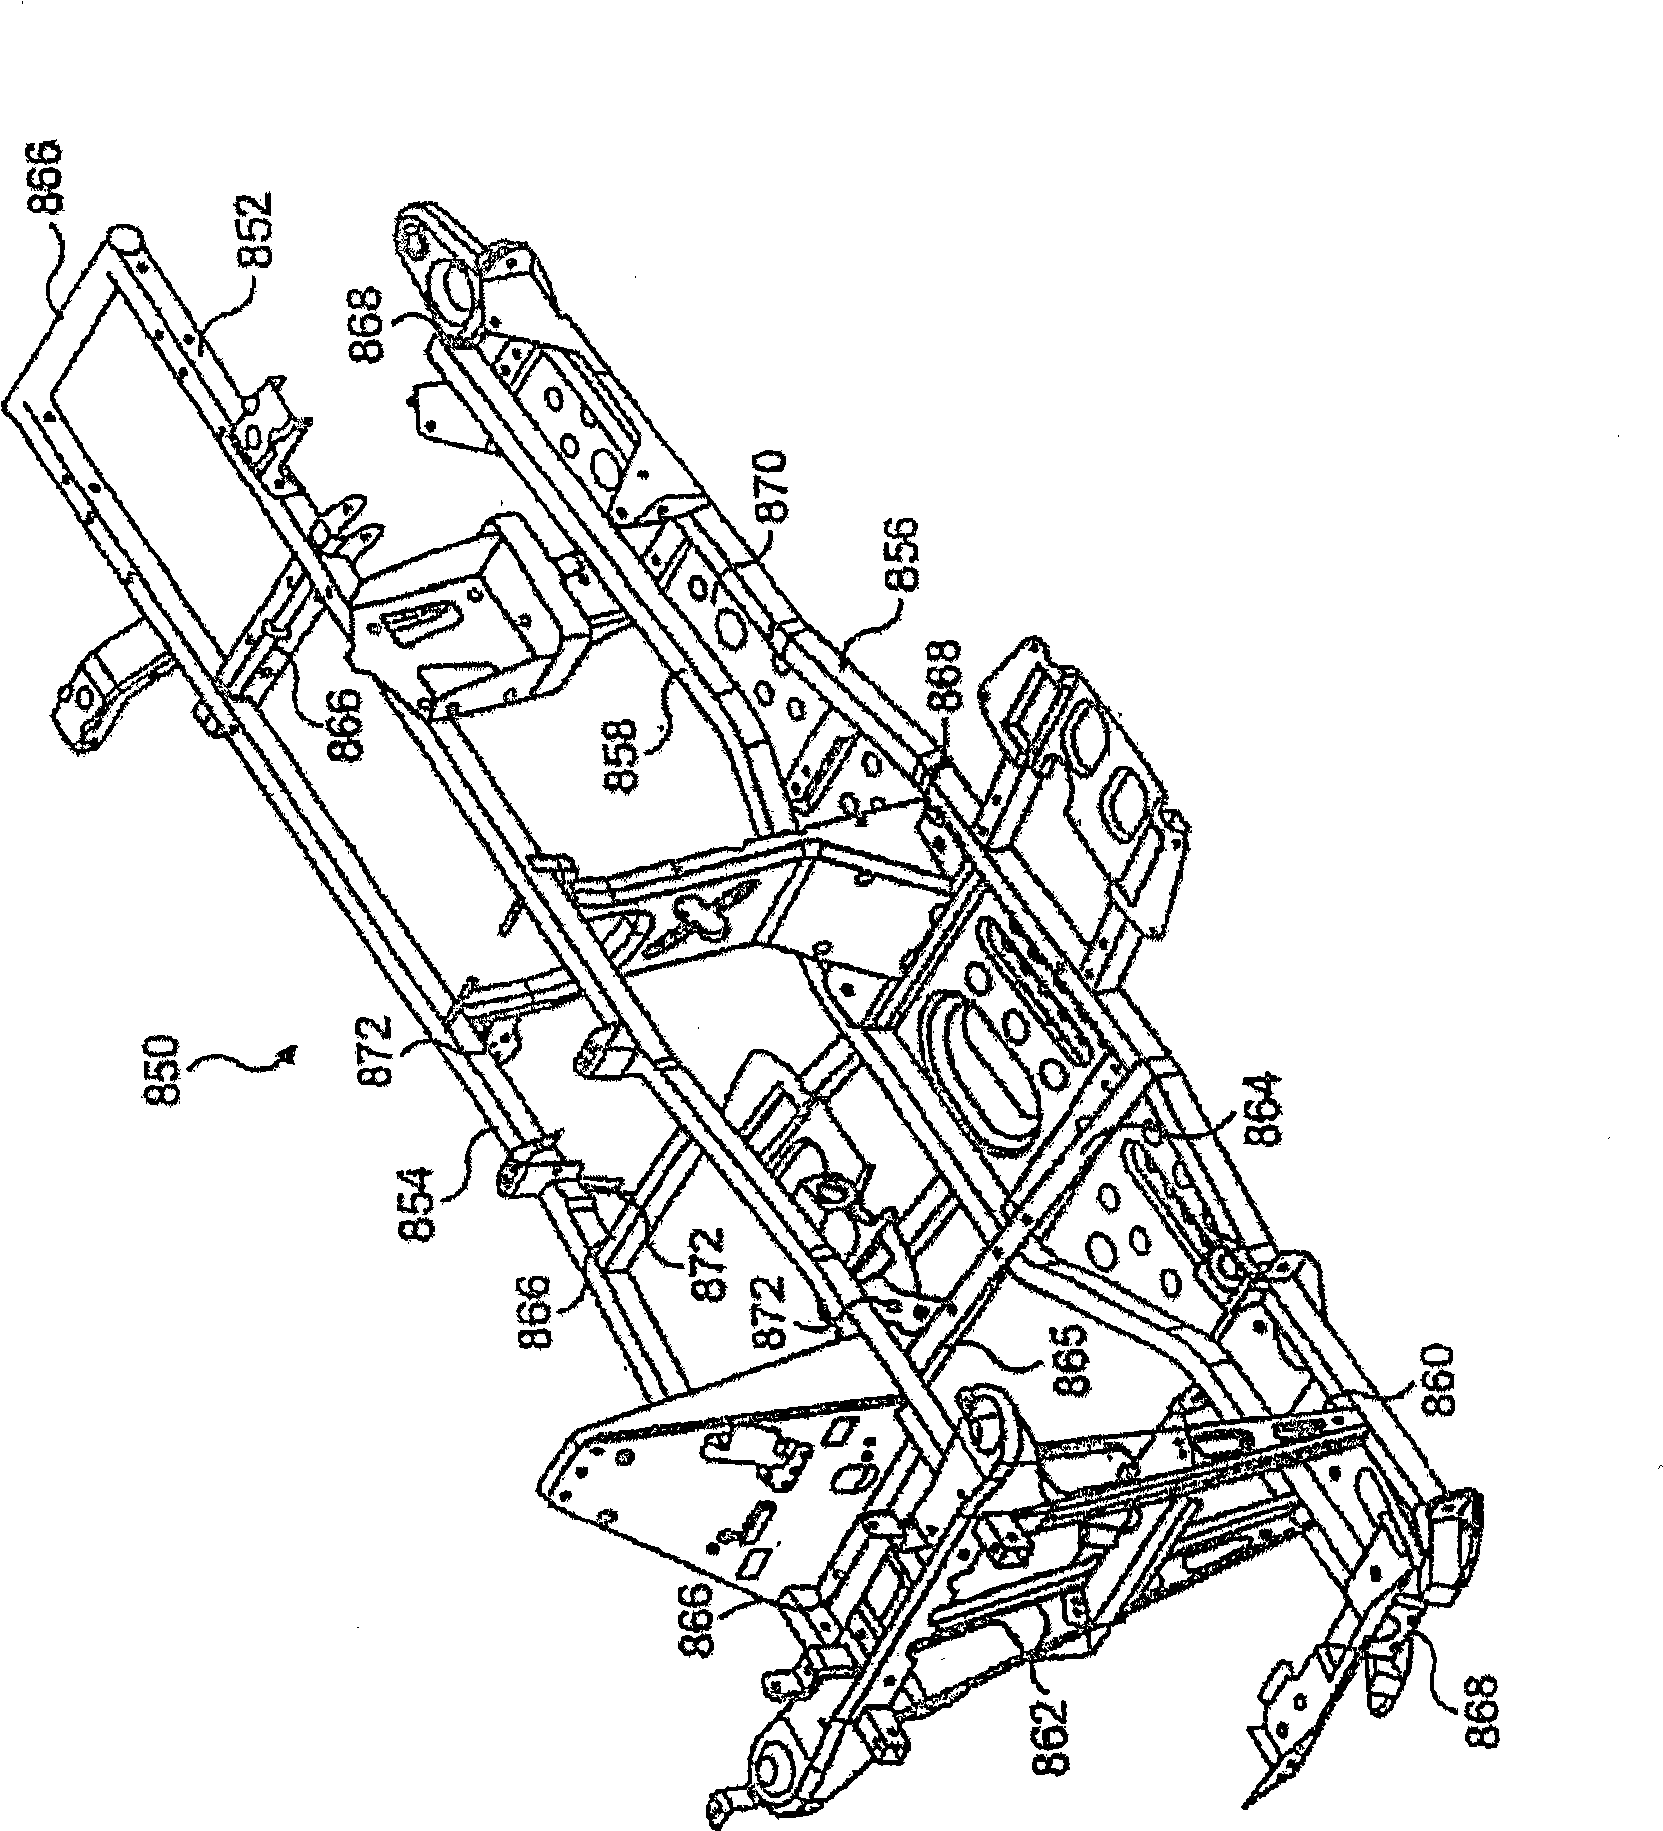 Riding/striding type wheeled vehicle and frame thereof